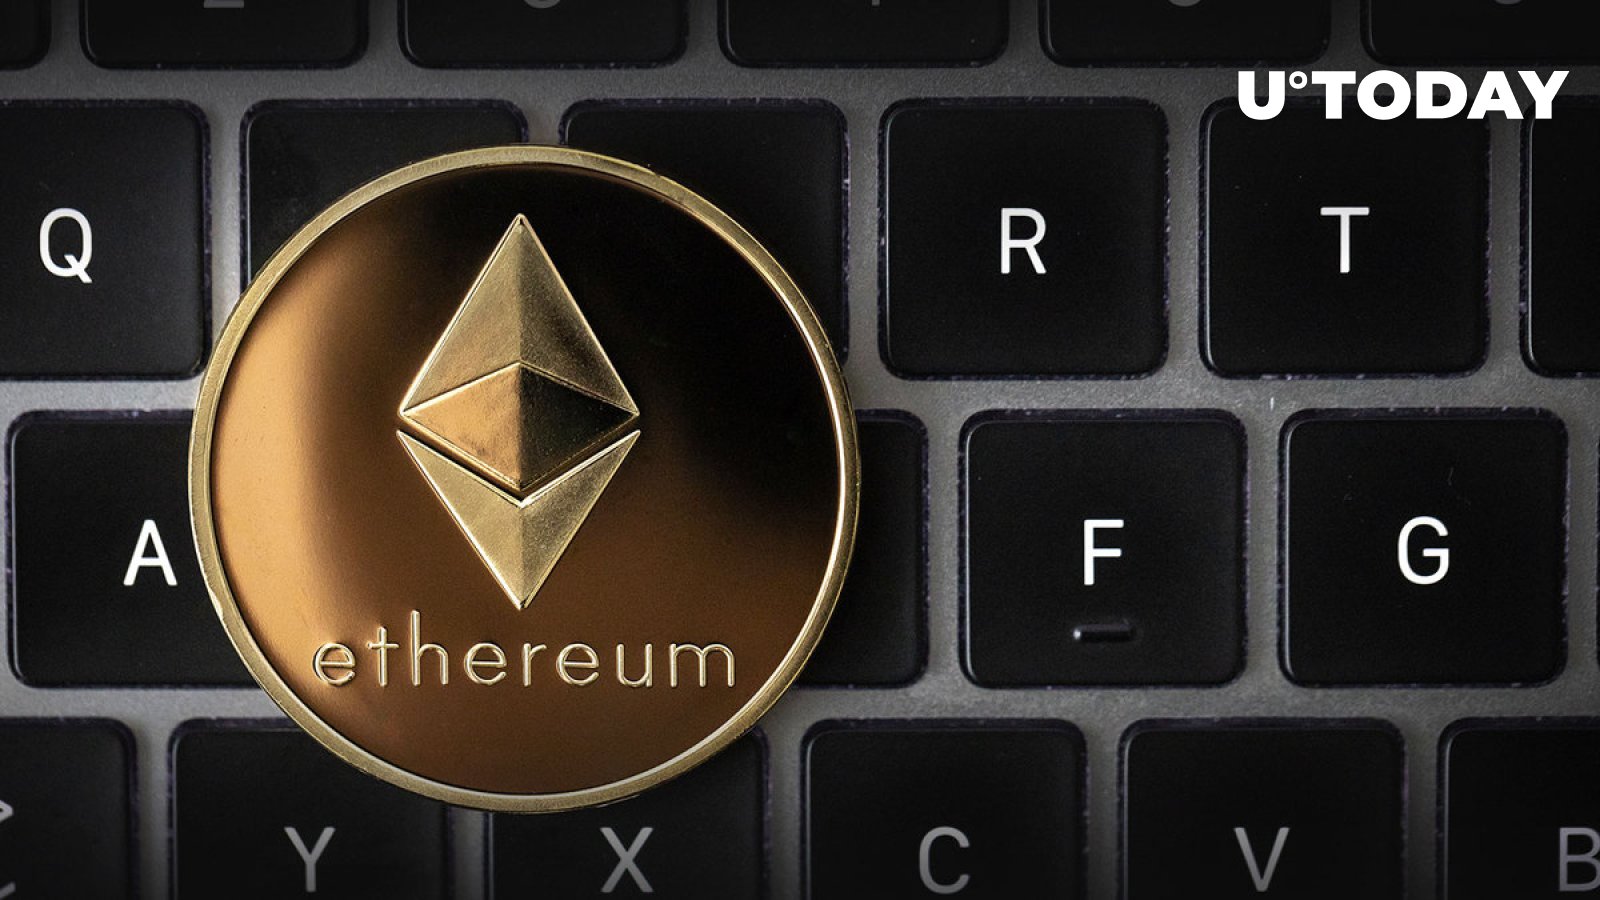 Prominent Crypto Analyst Has Important Warning About Ethereum